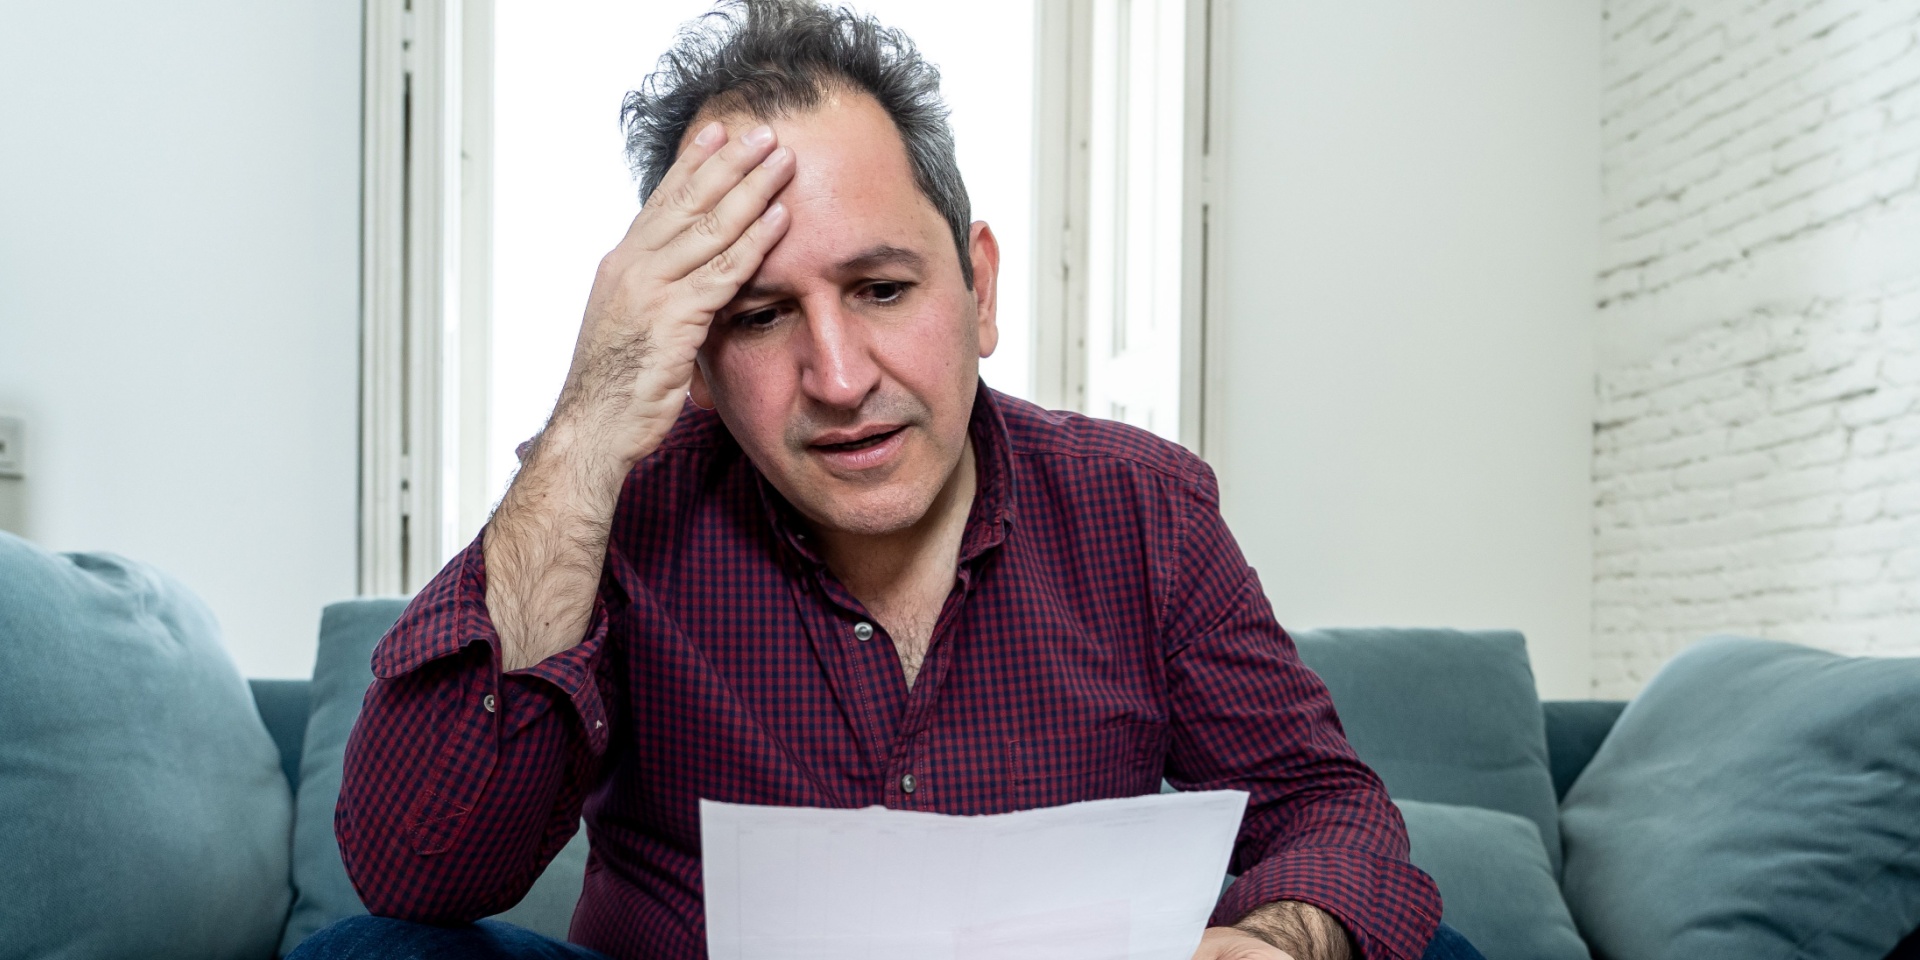 Stressed middle-aged man looking at financial paperwork